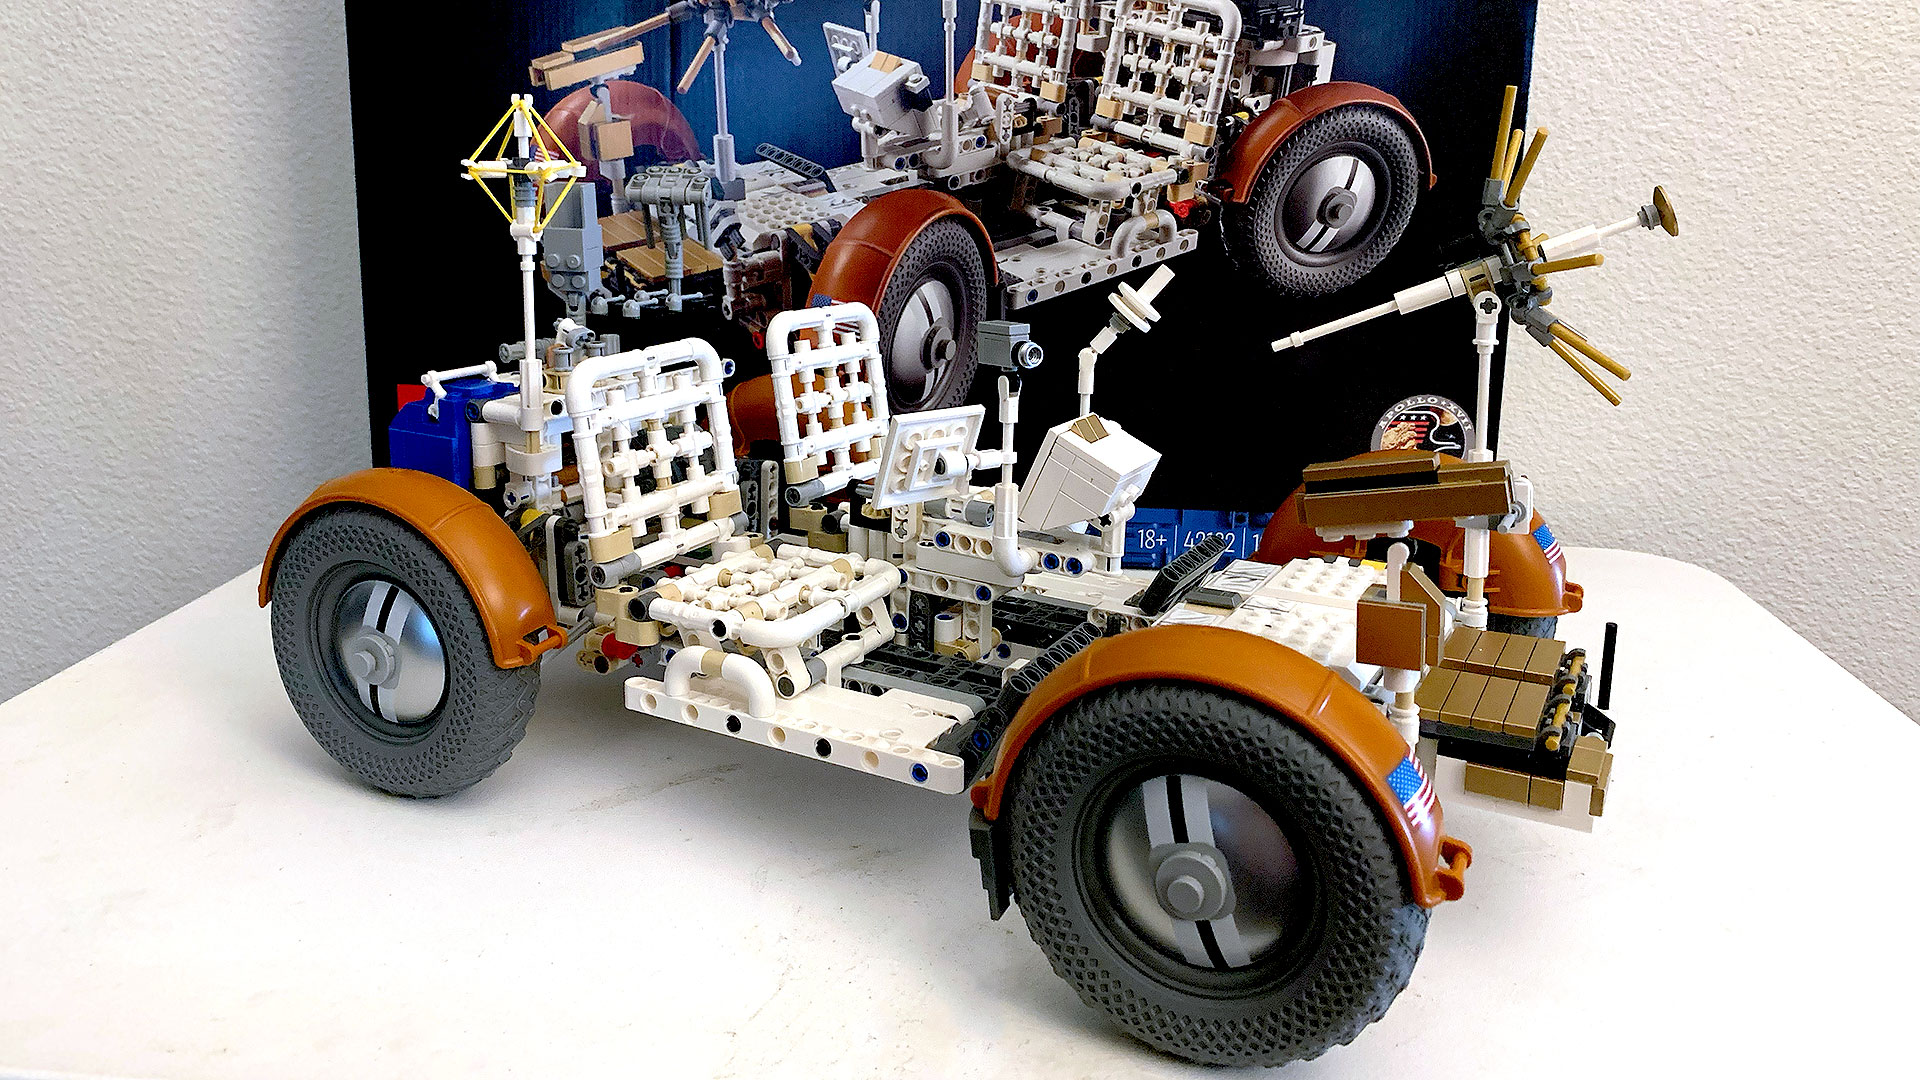  New Apollo Lunar Roving Vehicle features 'most accurate details' in a Lego set 